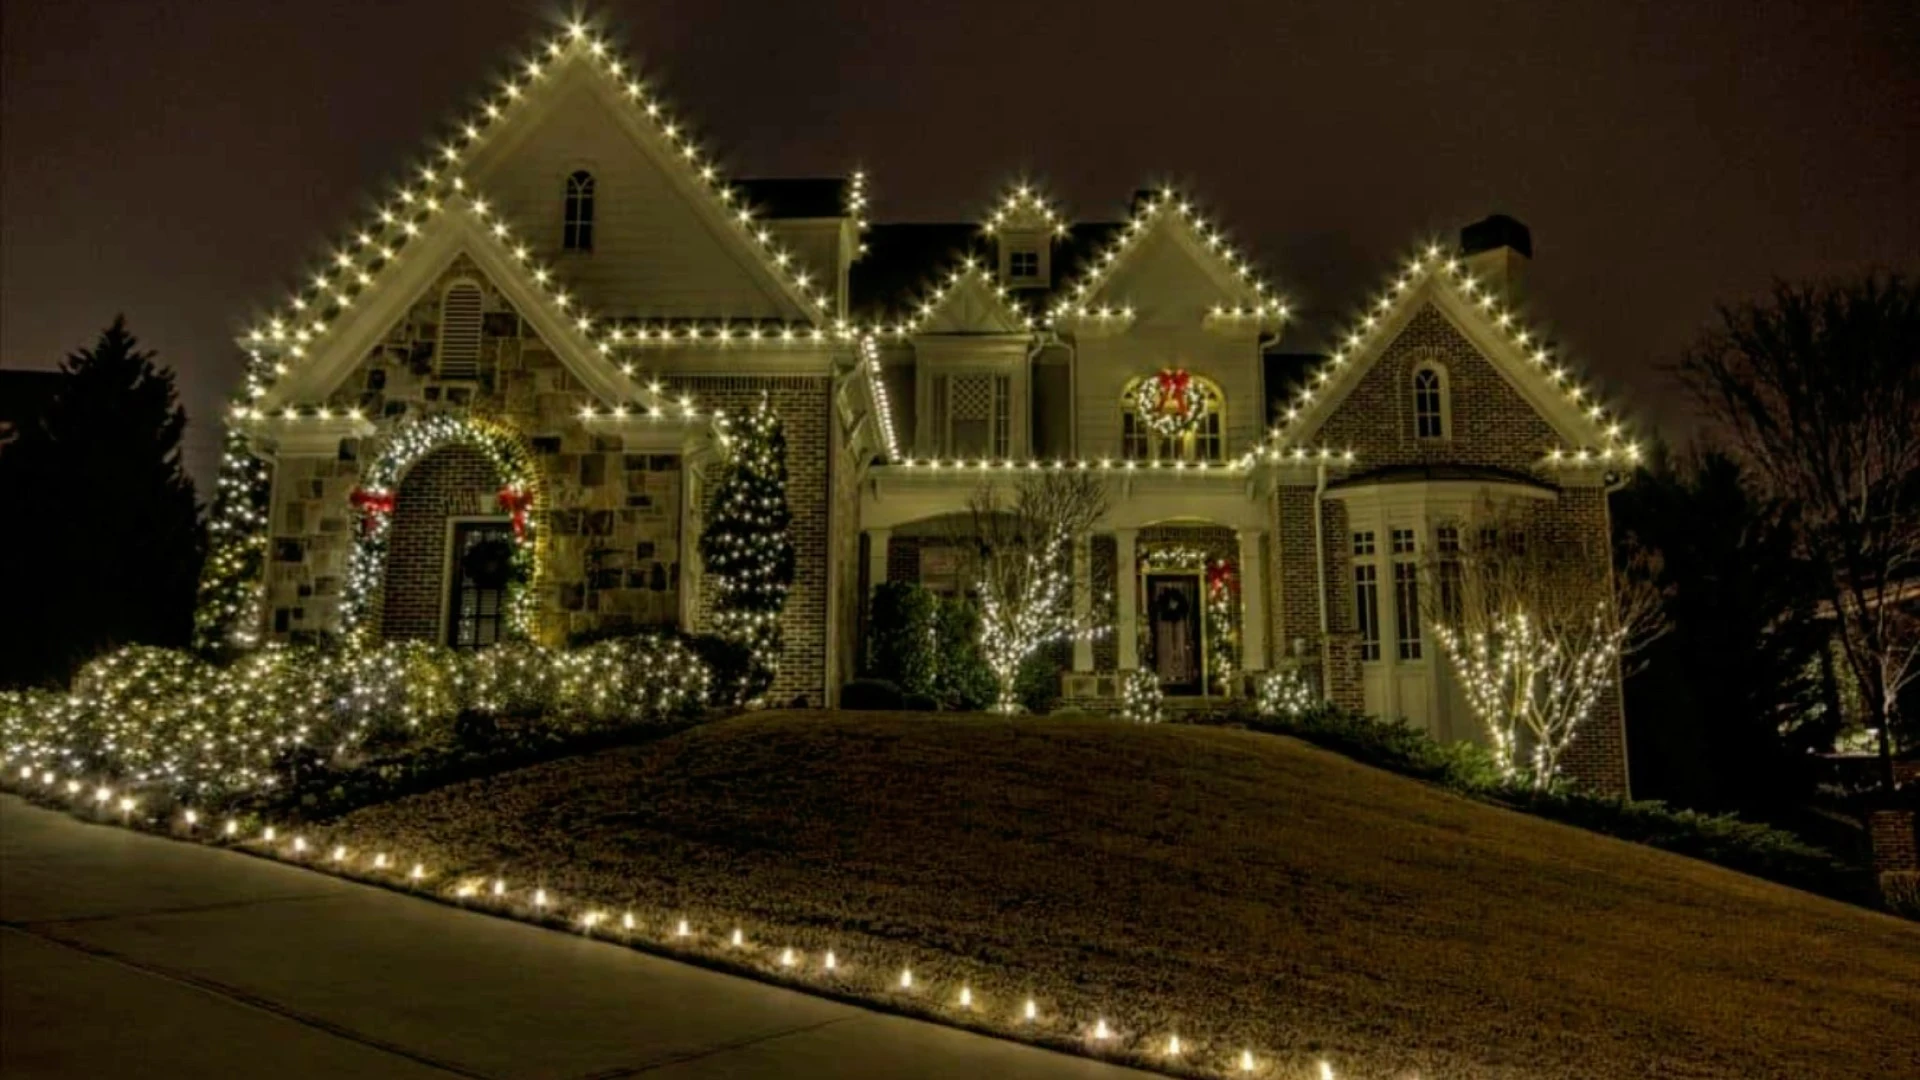 Cheery Holiday Light Decoration Ideas for Your Home or Business